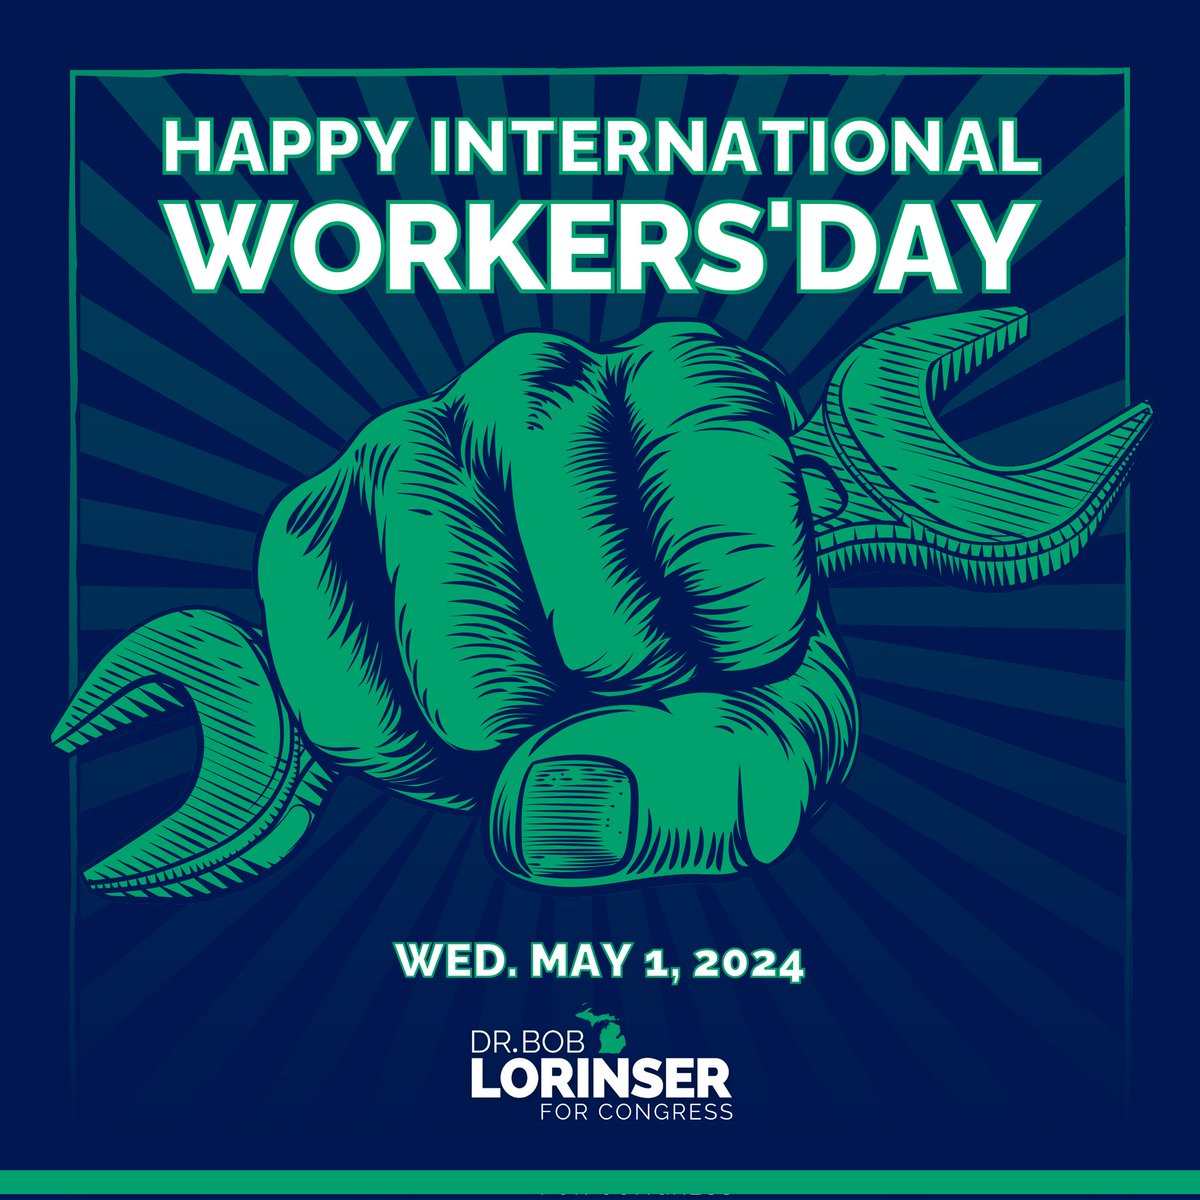 On International Workers' Day, we reaffirm our support for family sustaining wages and workers' rights. We must build a strong working class because the working class builds America. Today, and every day, we celebrate workers worldwide. #MI01 #SolidarityForever